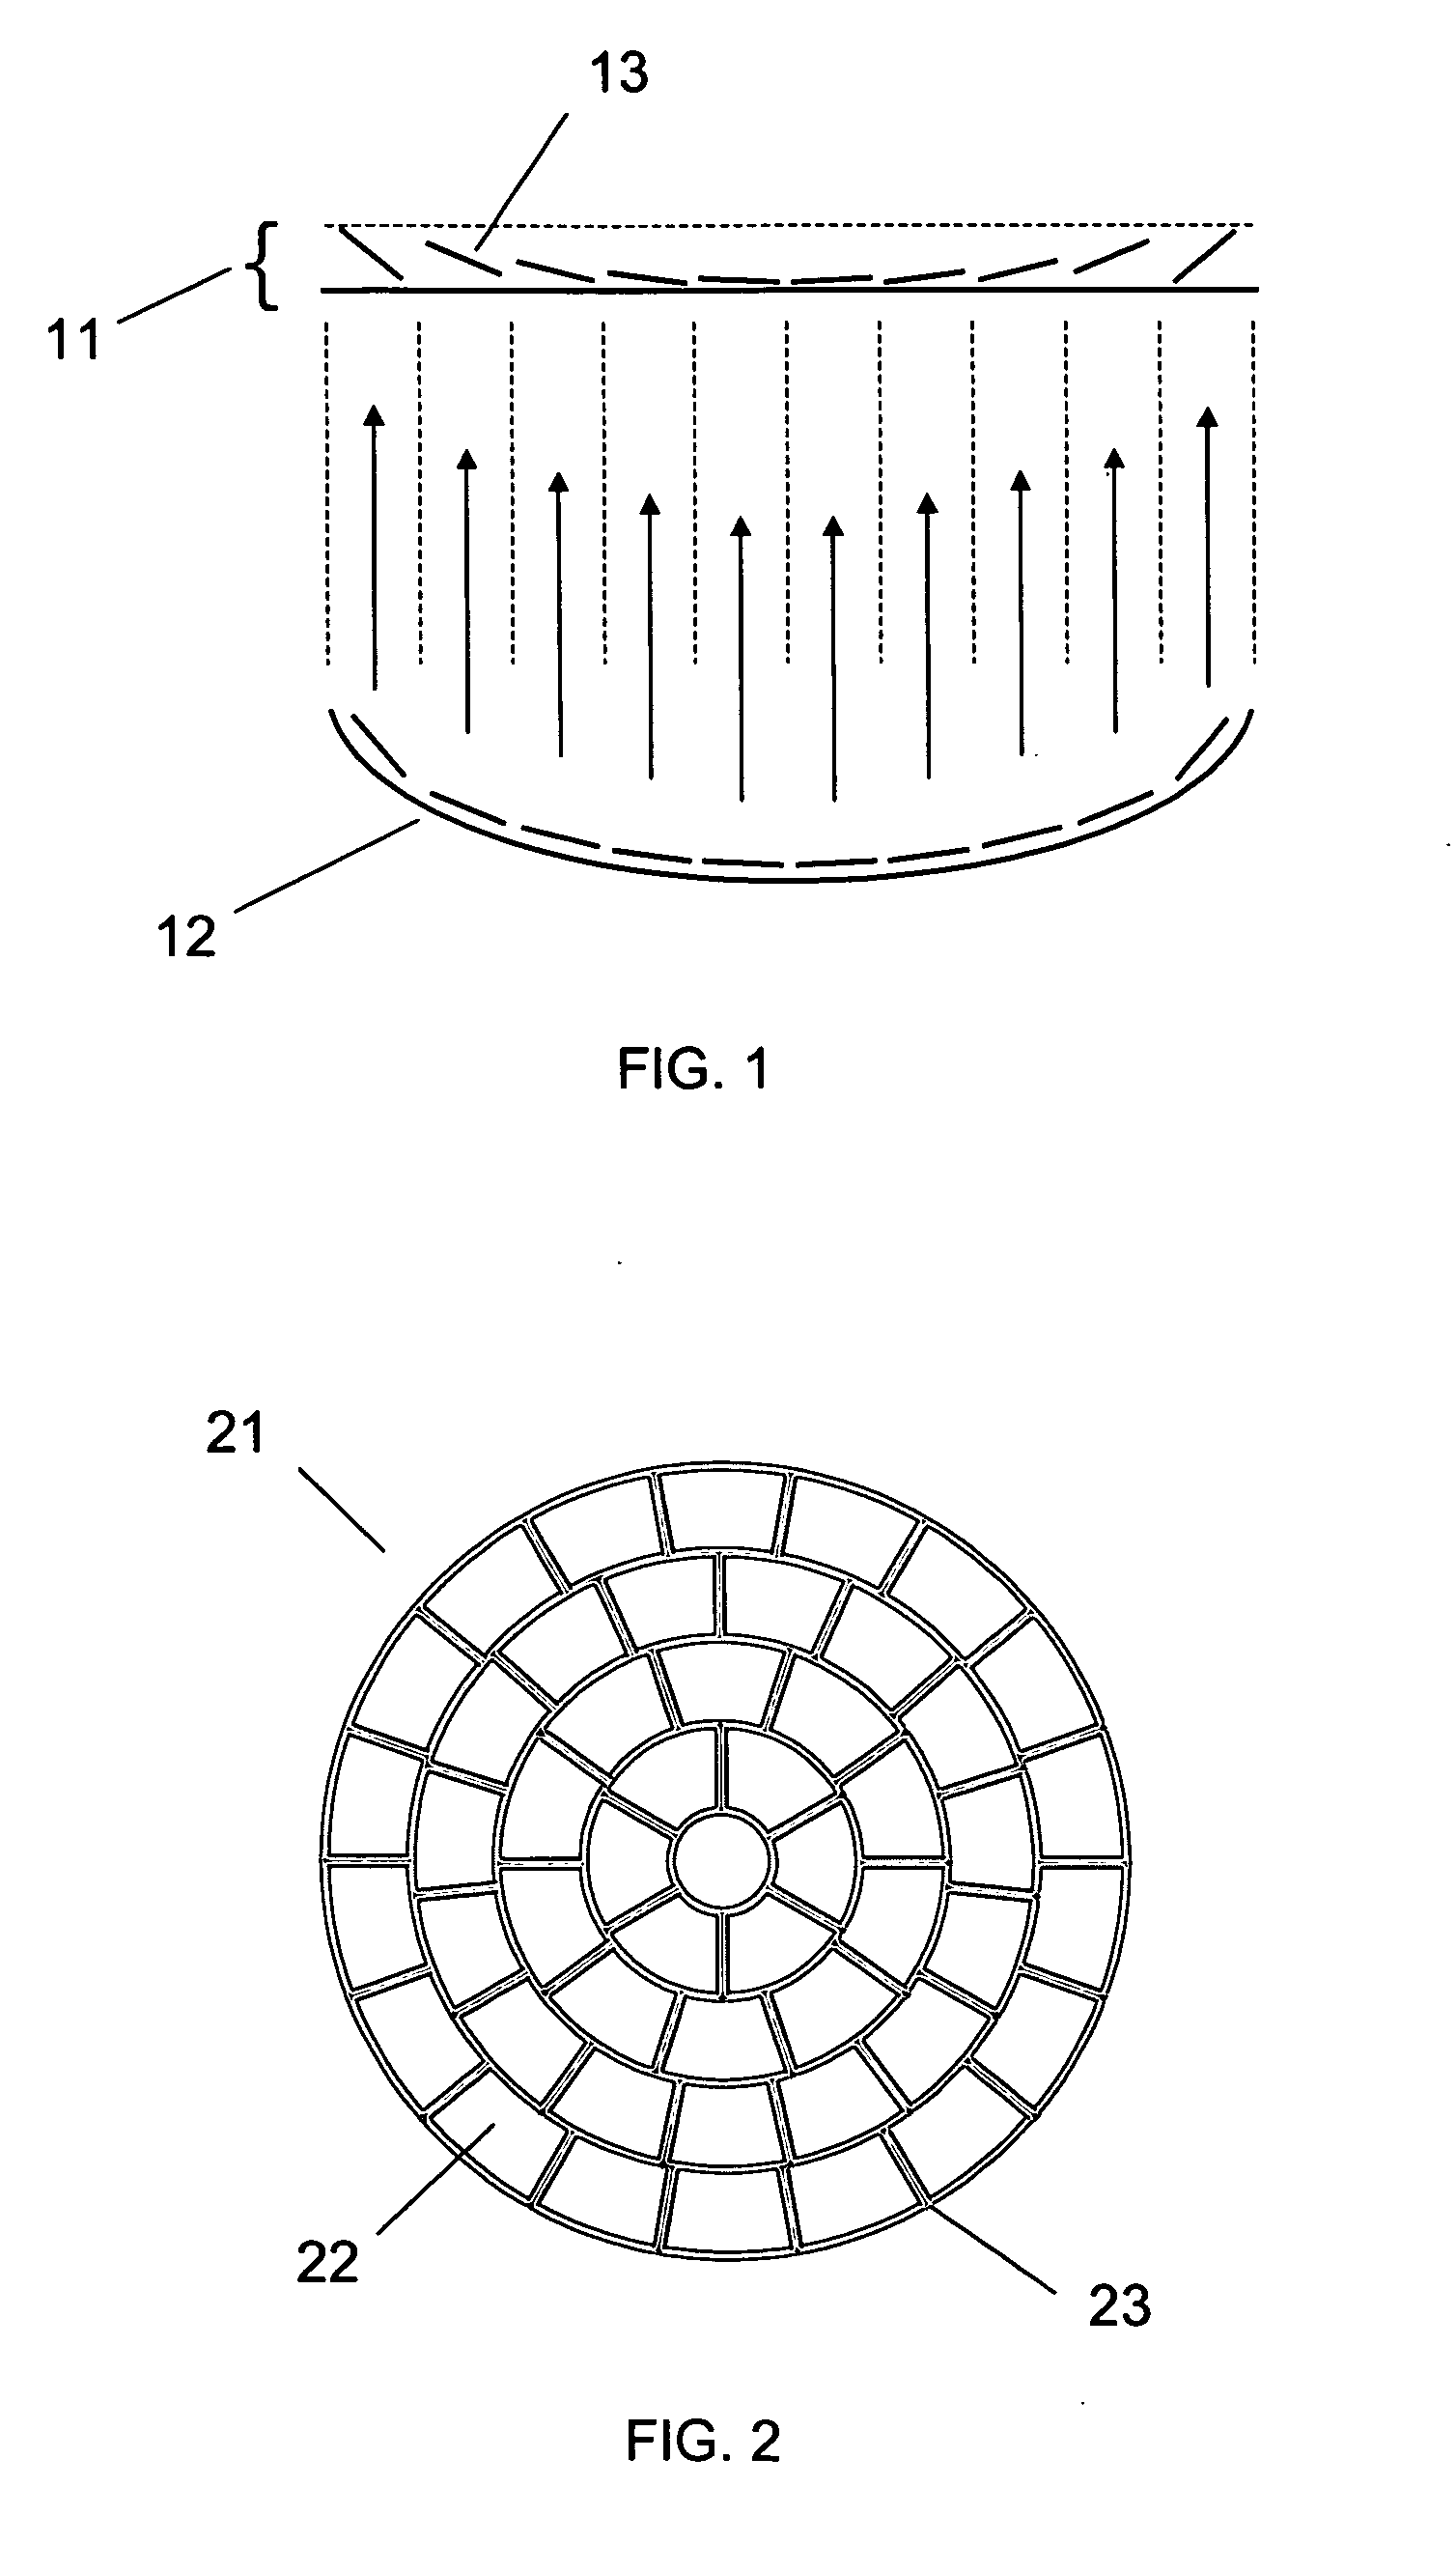 Variable focal length lens comprising micromirrors with two degrees of freedom rotation and one degree of freedom translation